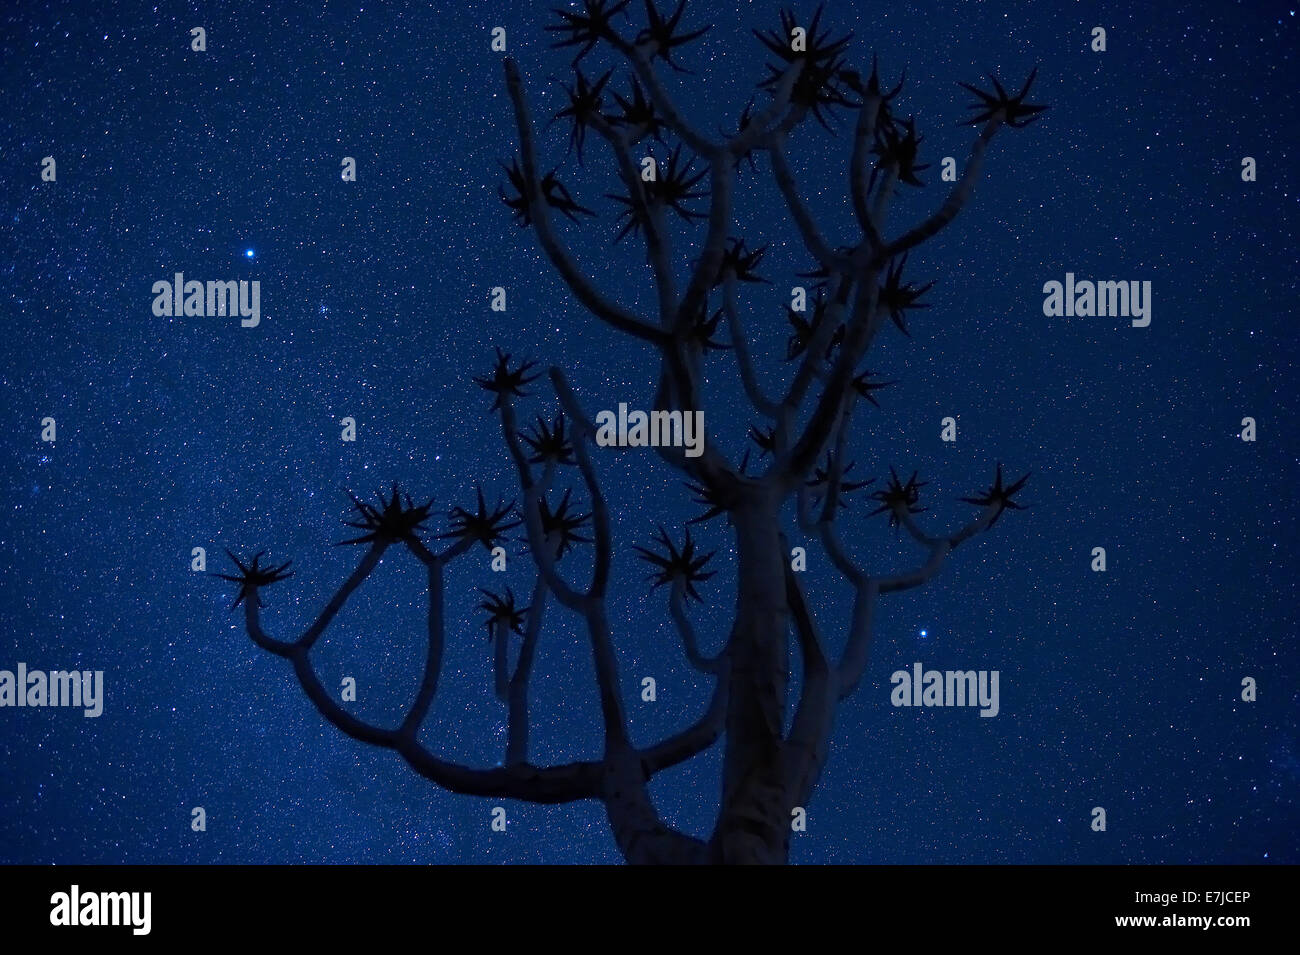 Africa, Fish River, quiver tree, night, Namibia, star sky, stars, Stock Photo